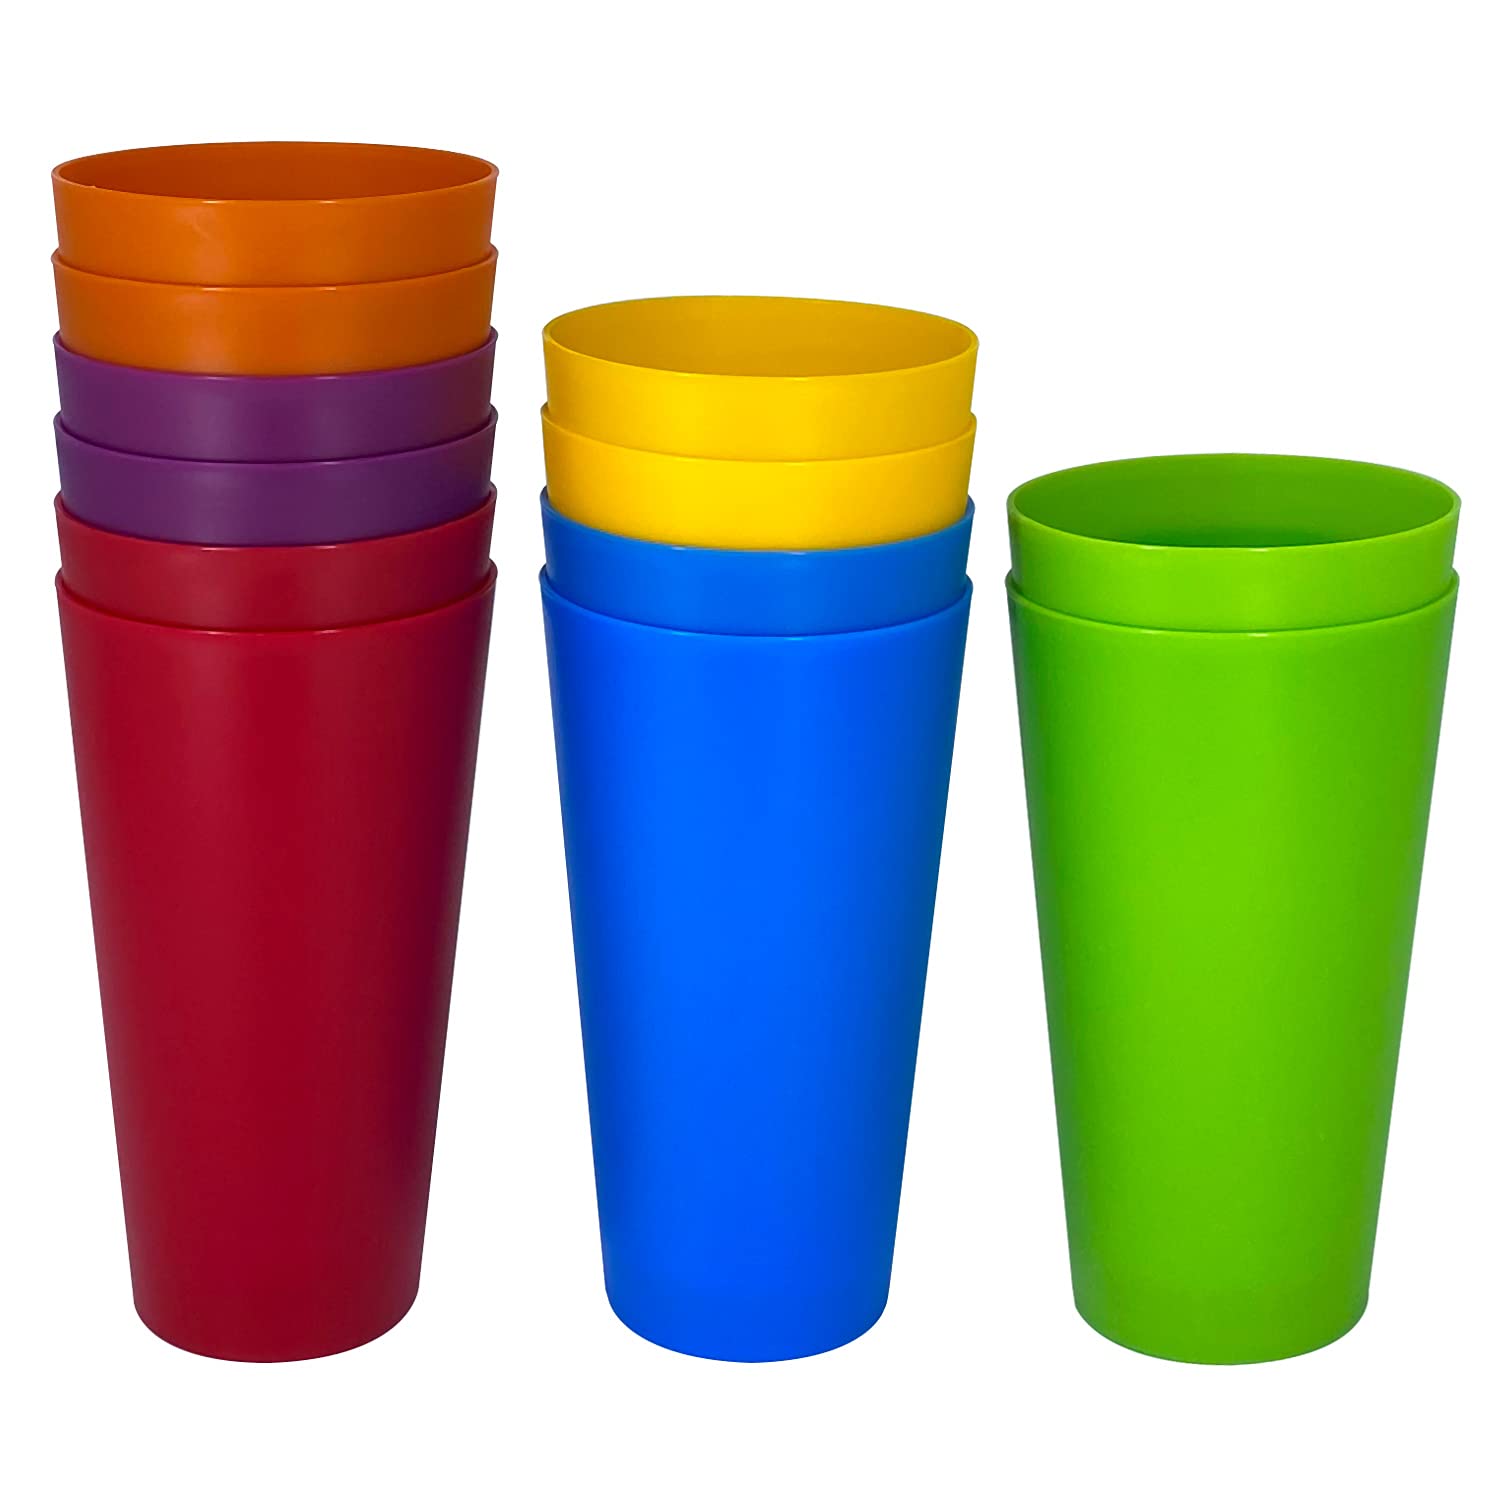 Yalin 32 ounce Plastic Tumblers/Large Drinking Glasses/Party Cups/Iced Tea Glasses,Unbreakable, Dishwasher Safe, BPA Free,set of 12 in 6 Assorted Colors